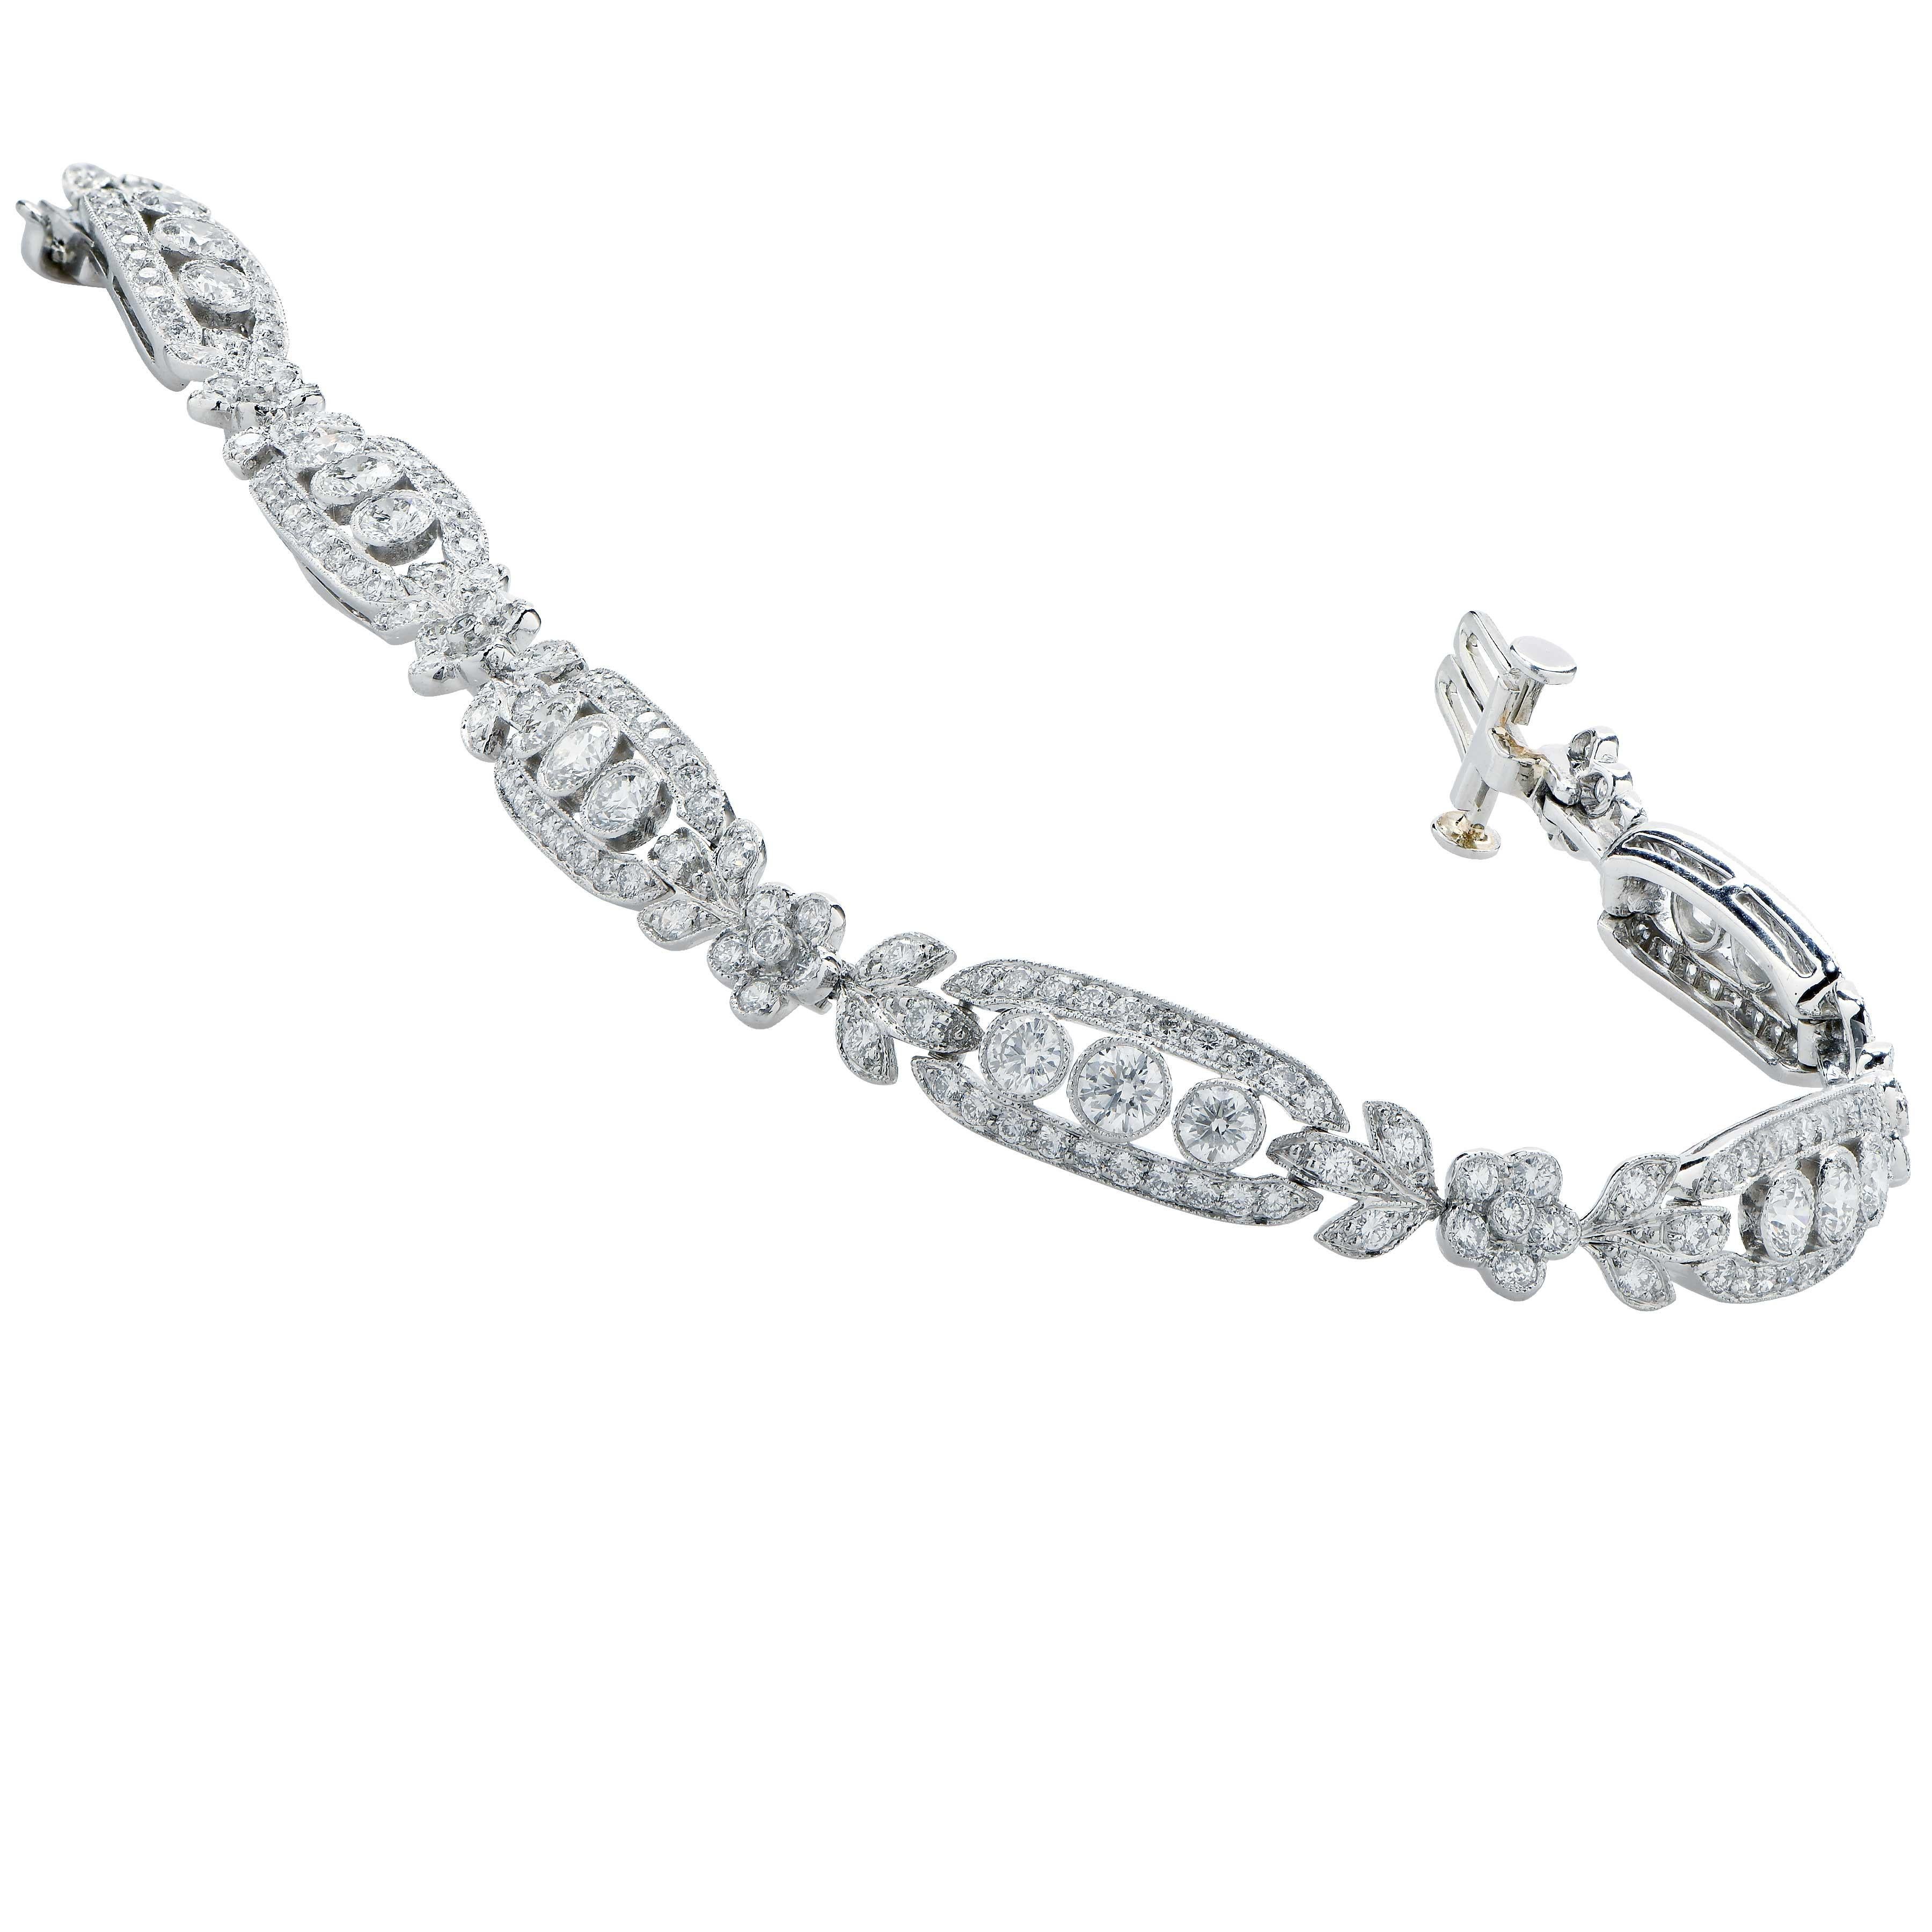 Tiffany and Company Diamond Bracelet in Platinum.
This beautiful bracelet features 240 round brilliant cut diamonds with an estimated total weight of 4.1 carats.
Weight is 20.2 grams